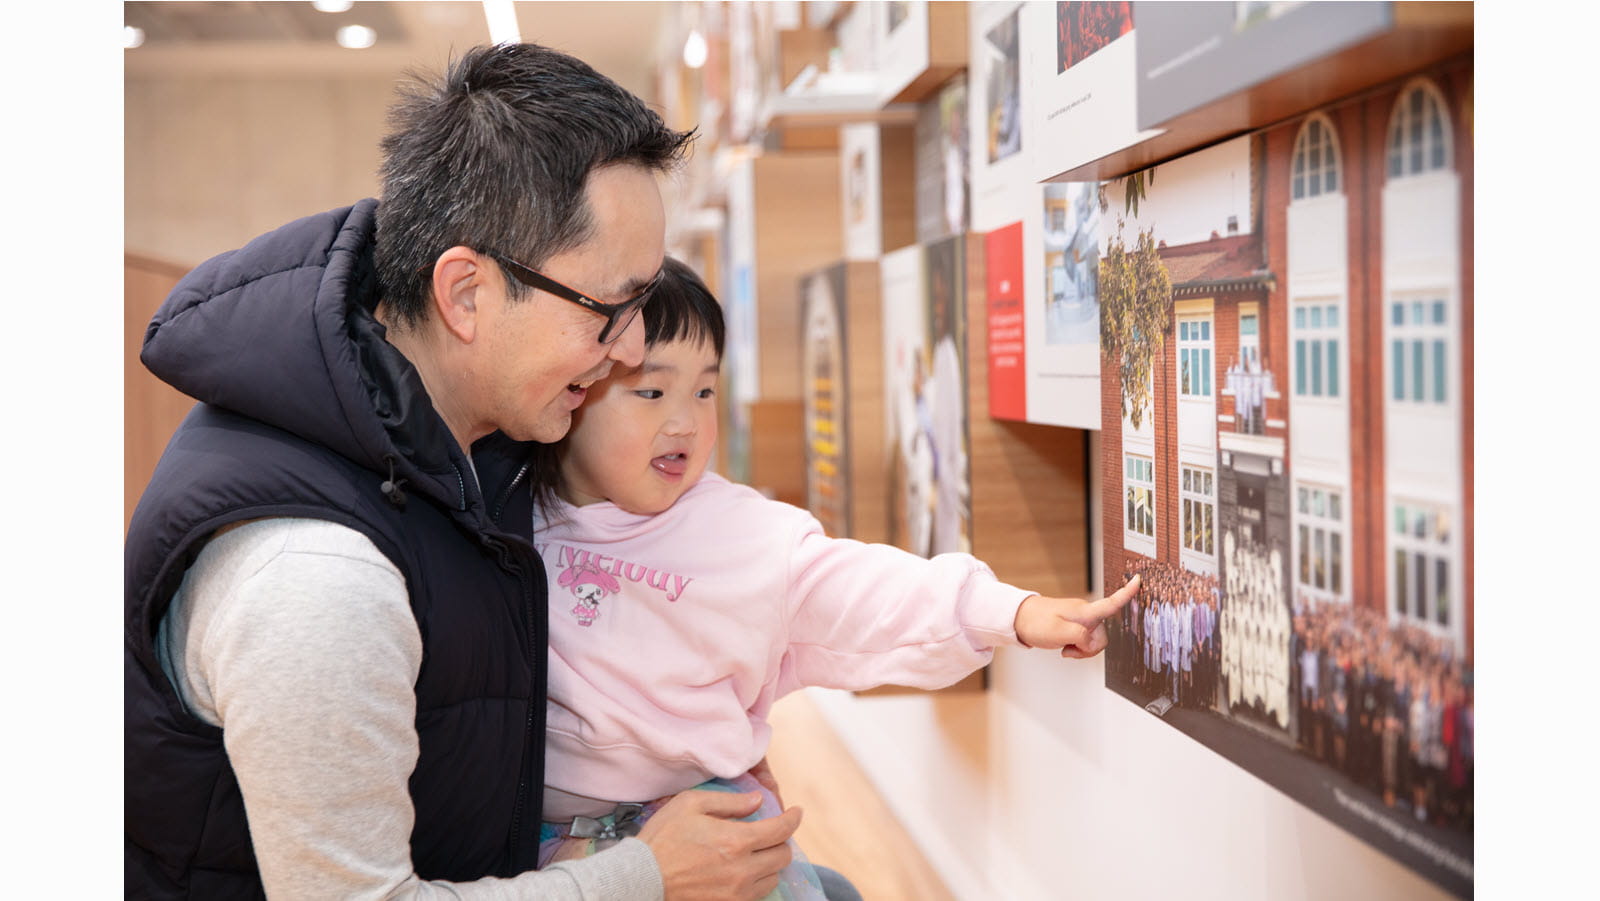 A child points to a wall display at CSL's Friends & Family Day.